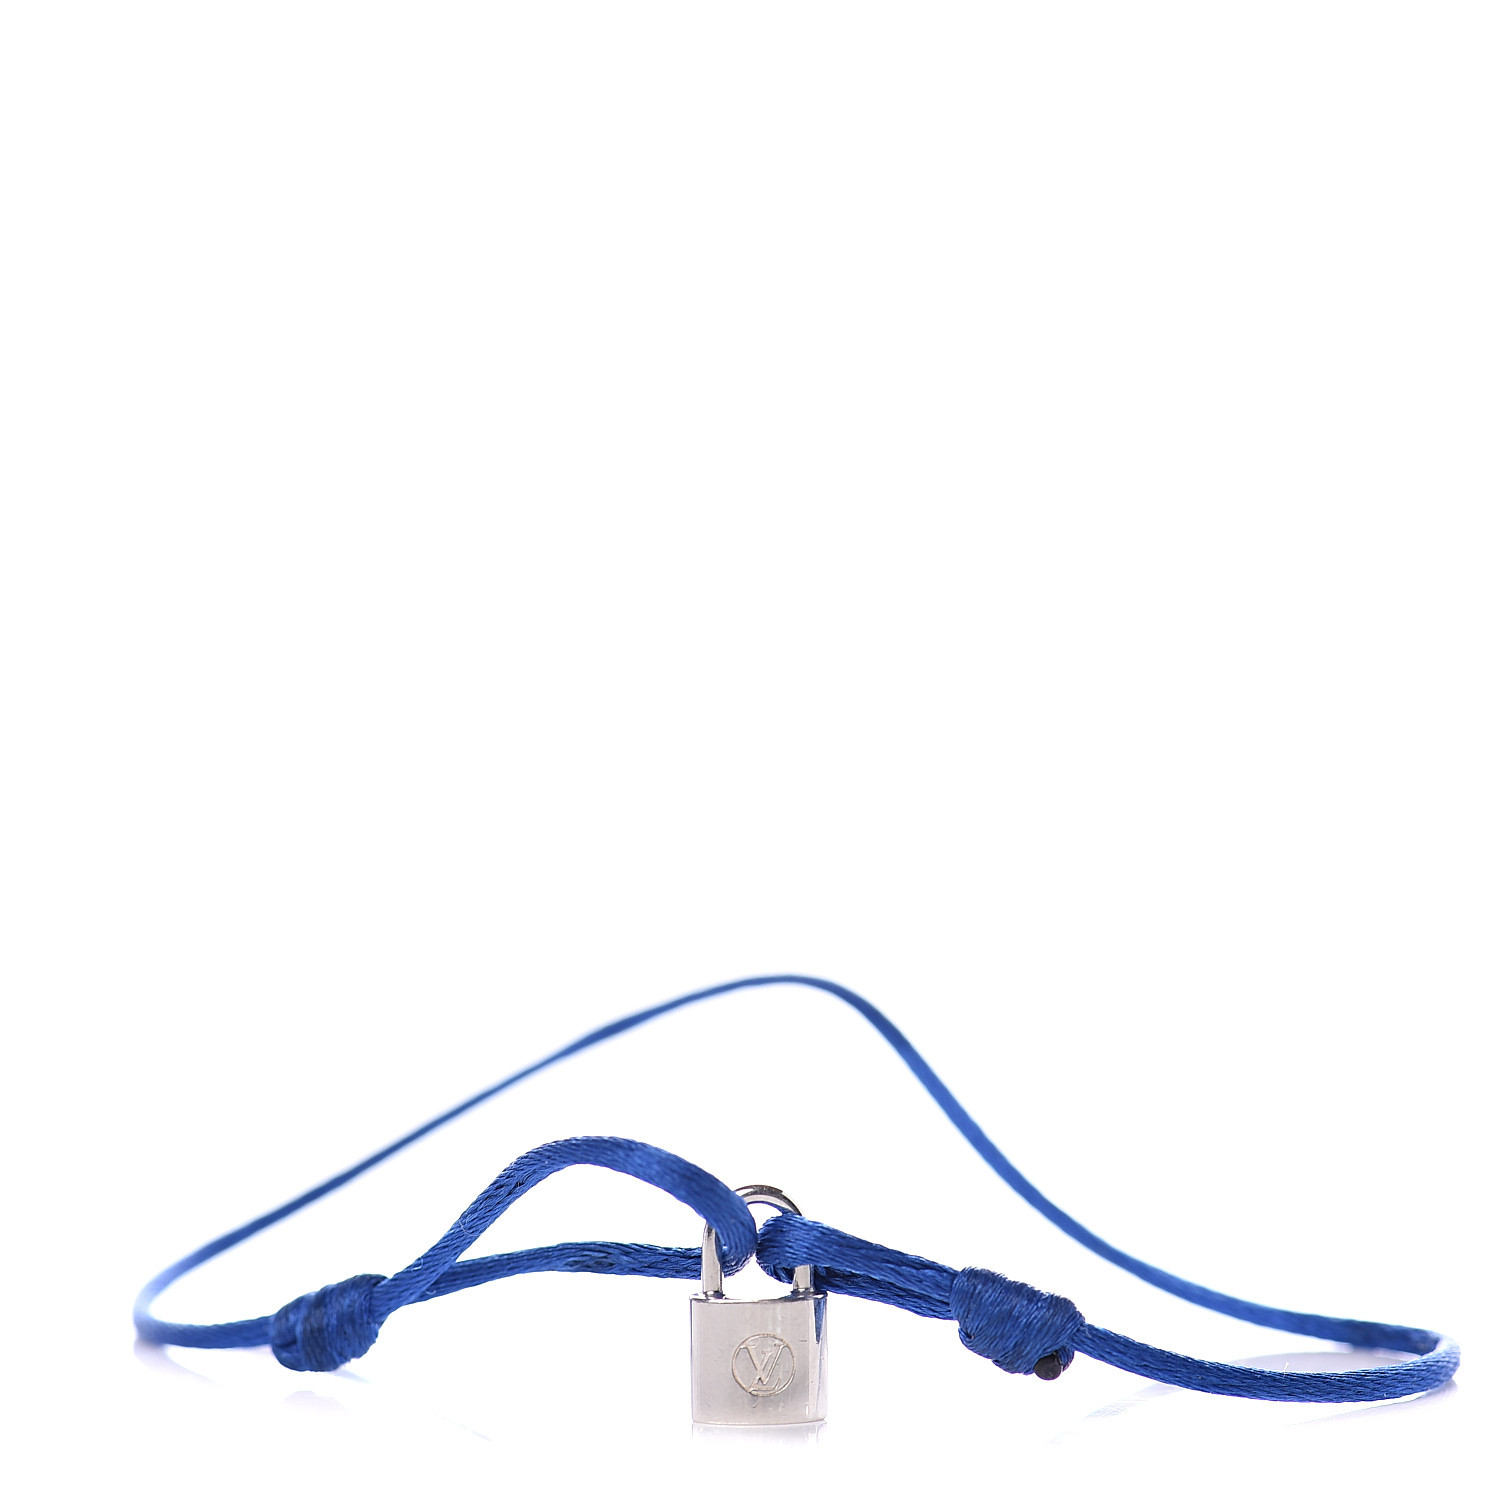 Silver Lockit X Doudou Louis Bracelet, Recycled Silver And Cord